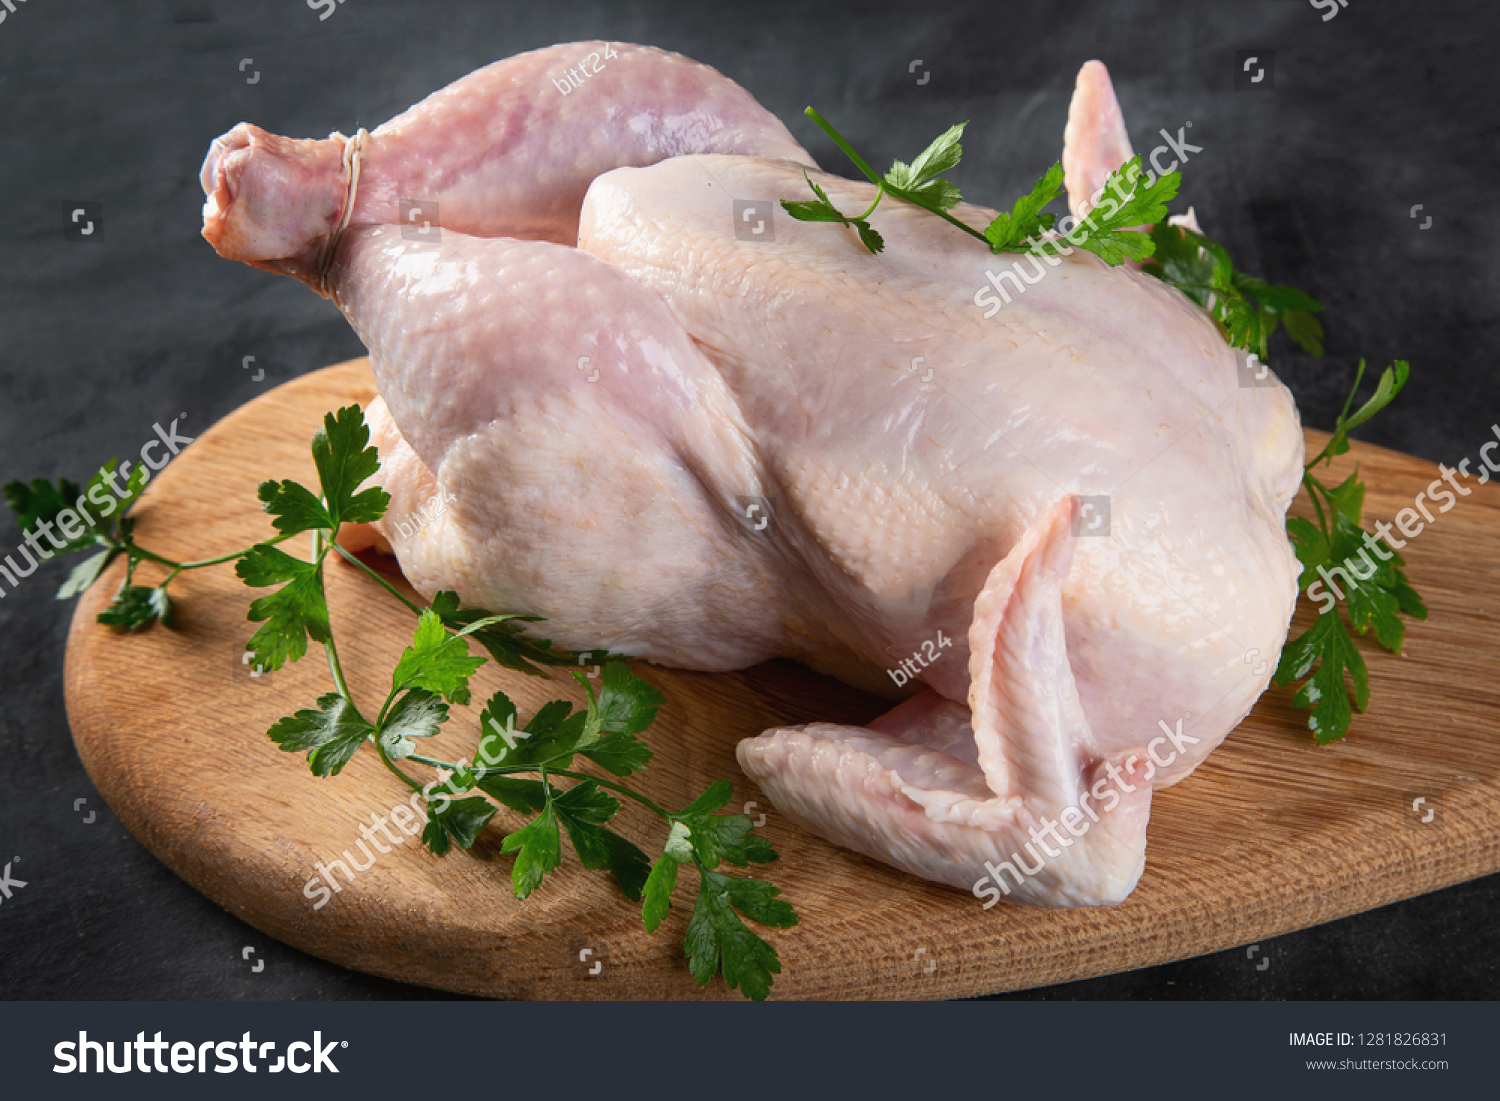 Whole raw chicken with seasonings on wooden cutting board on black background #1281826831